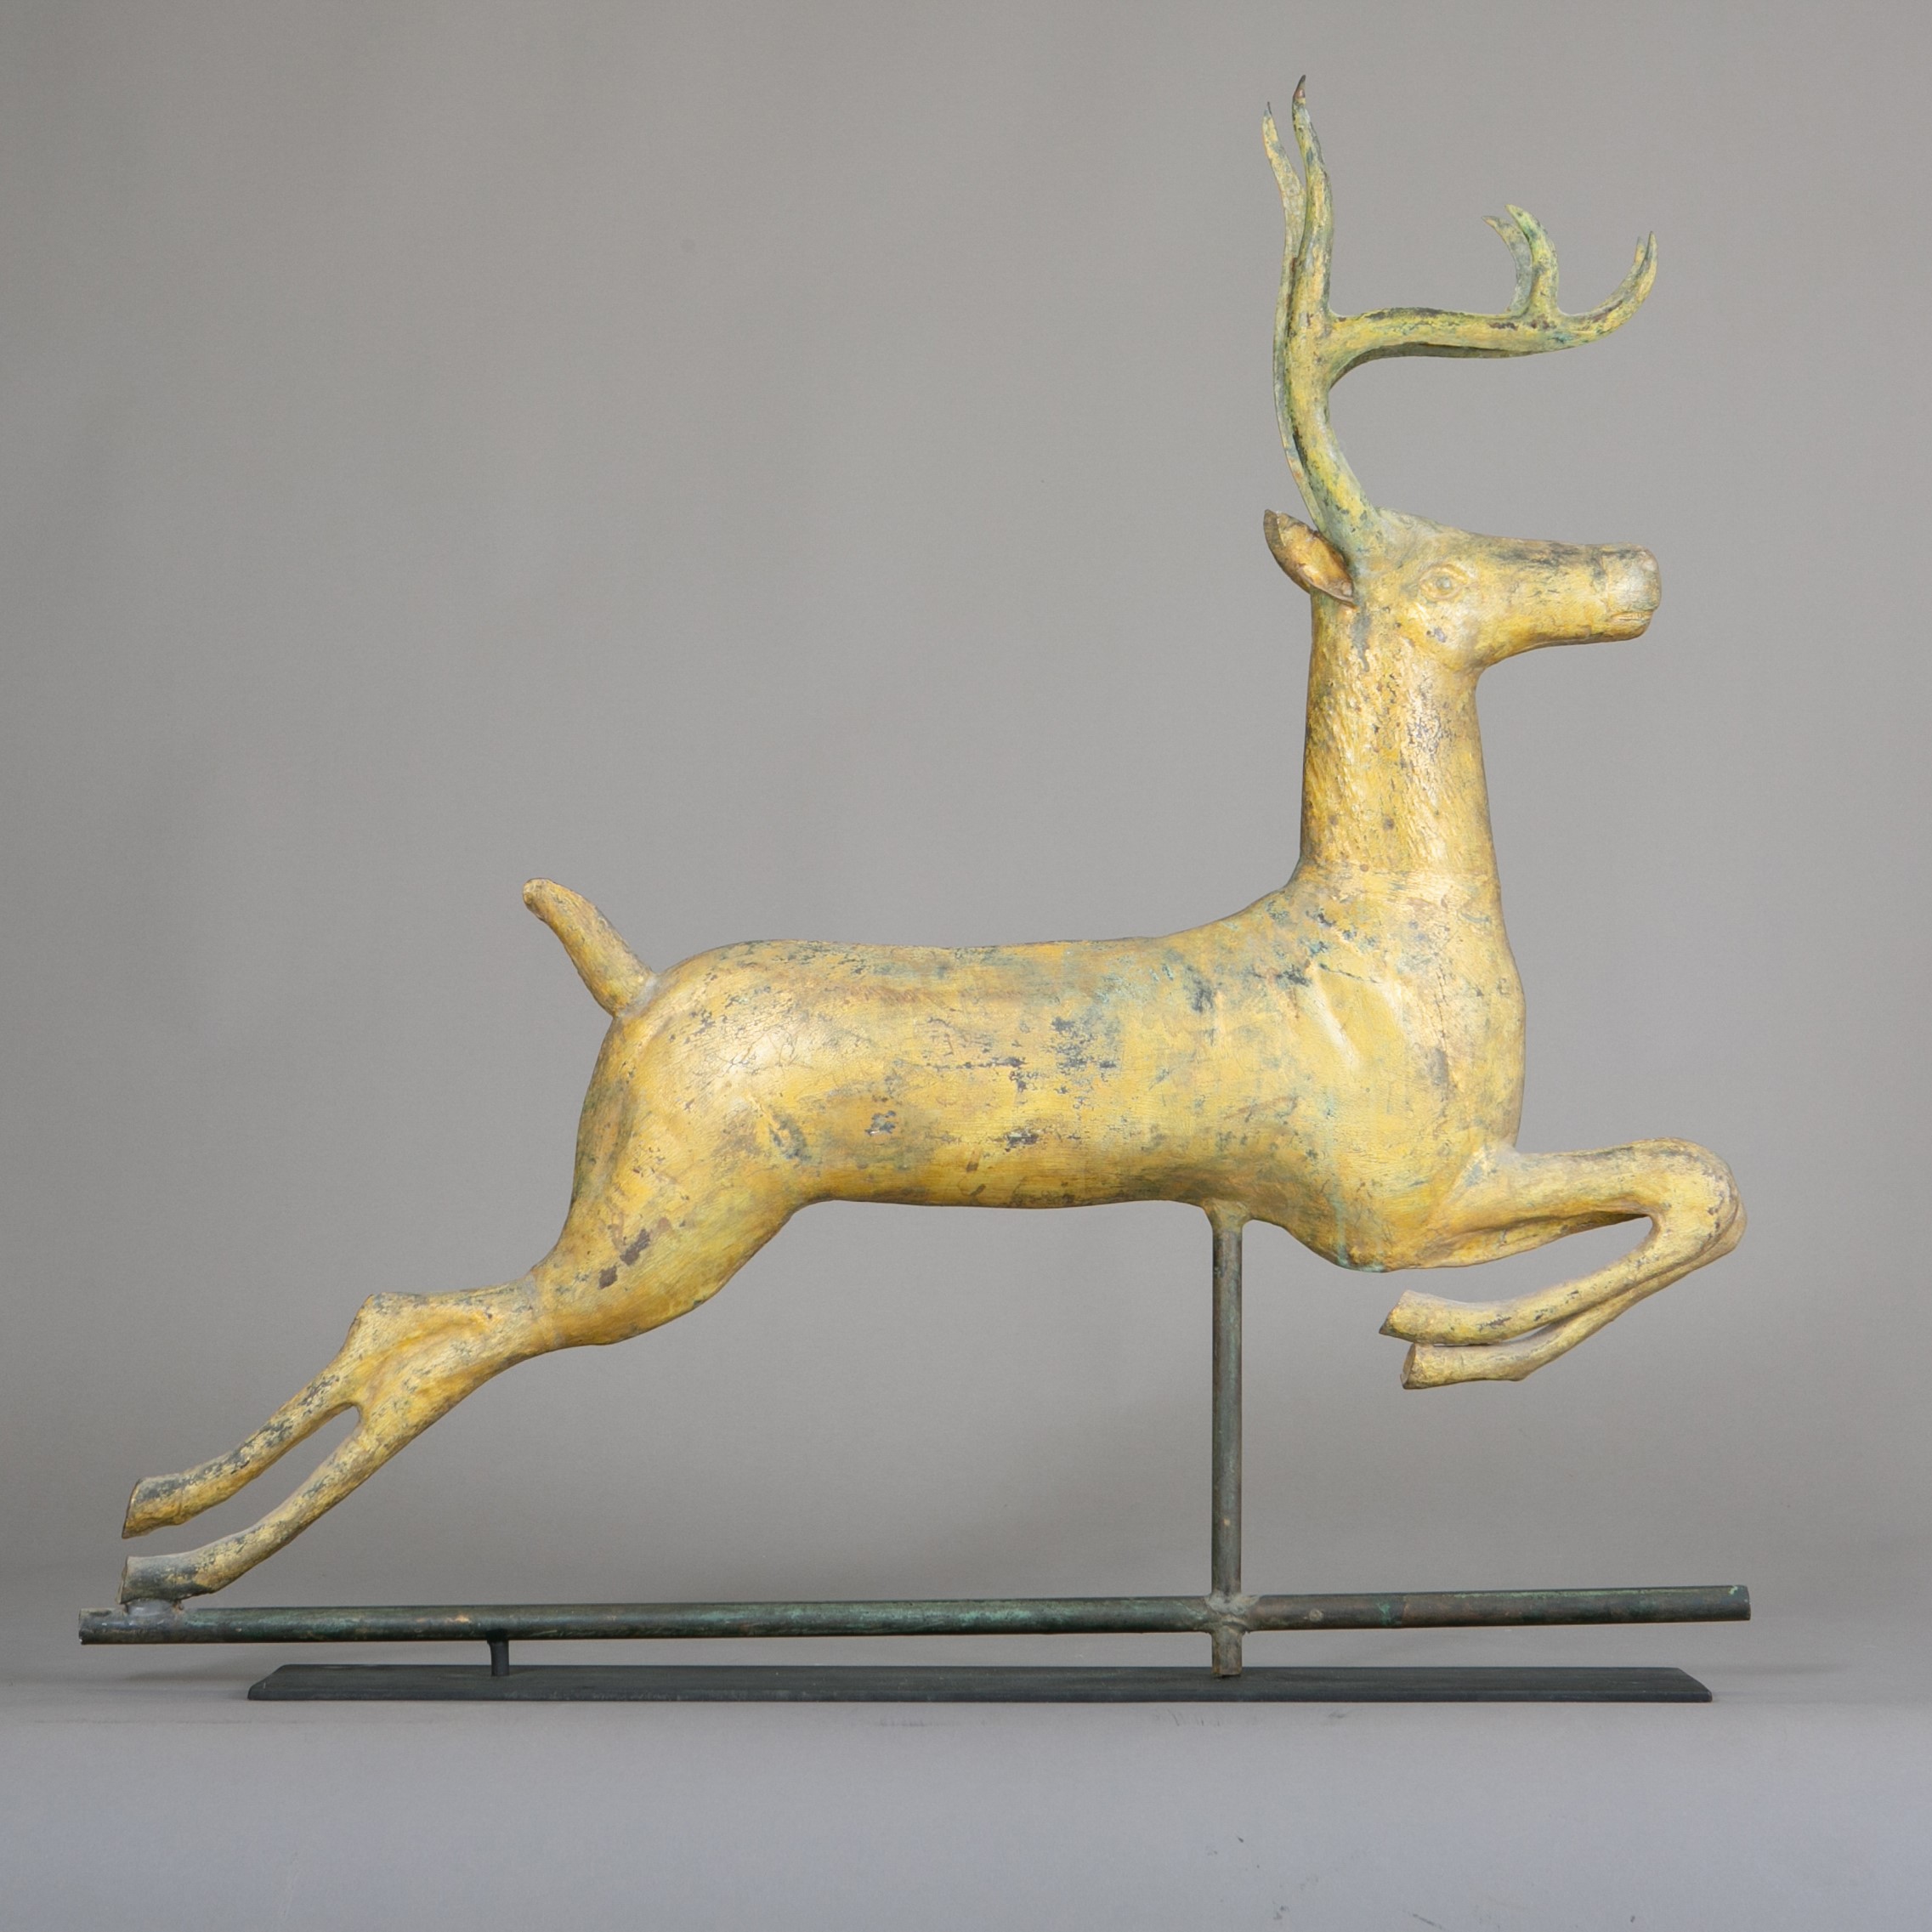 Leaping Stag
Possibly by A.L. Jewell & Company (1852-1867), Courtesy Jeffrey Tillou